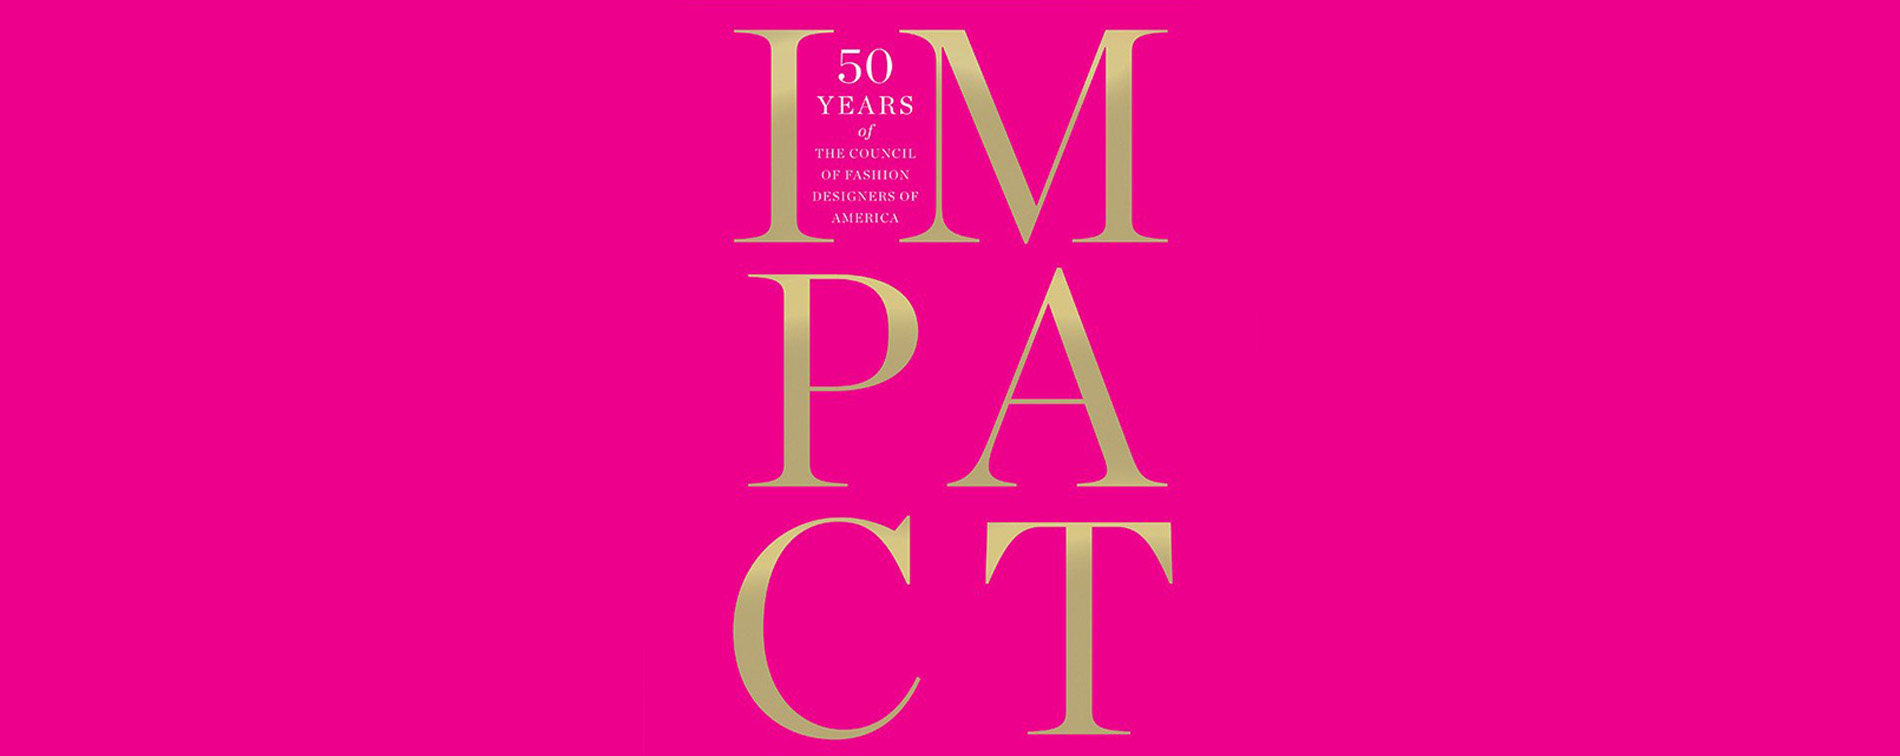 book cover for impact in a gold serif font against a hot pink background